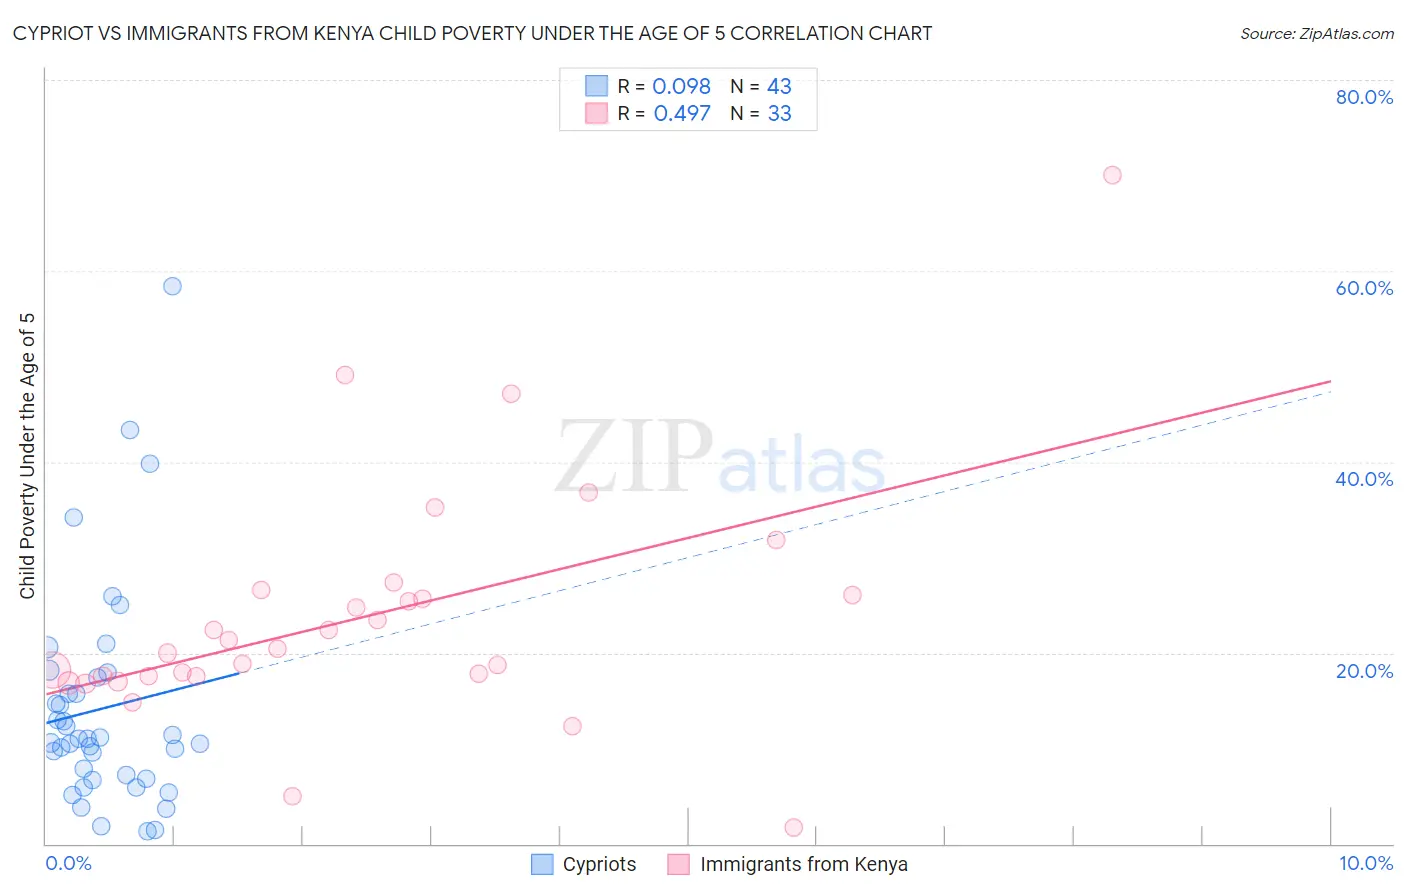 Cypriot vs Immigrants from Kenya Child Poverty Under the Age of 5